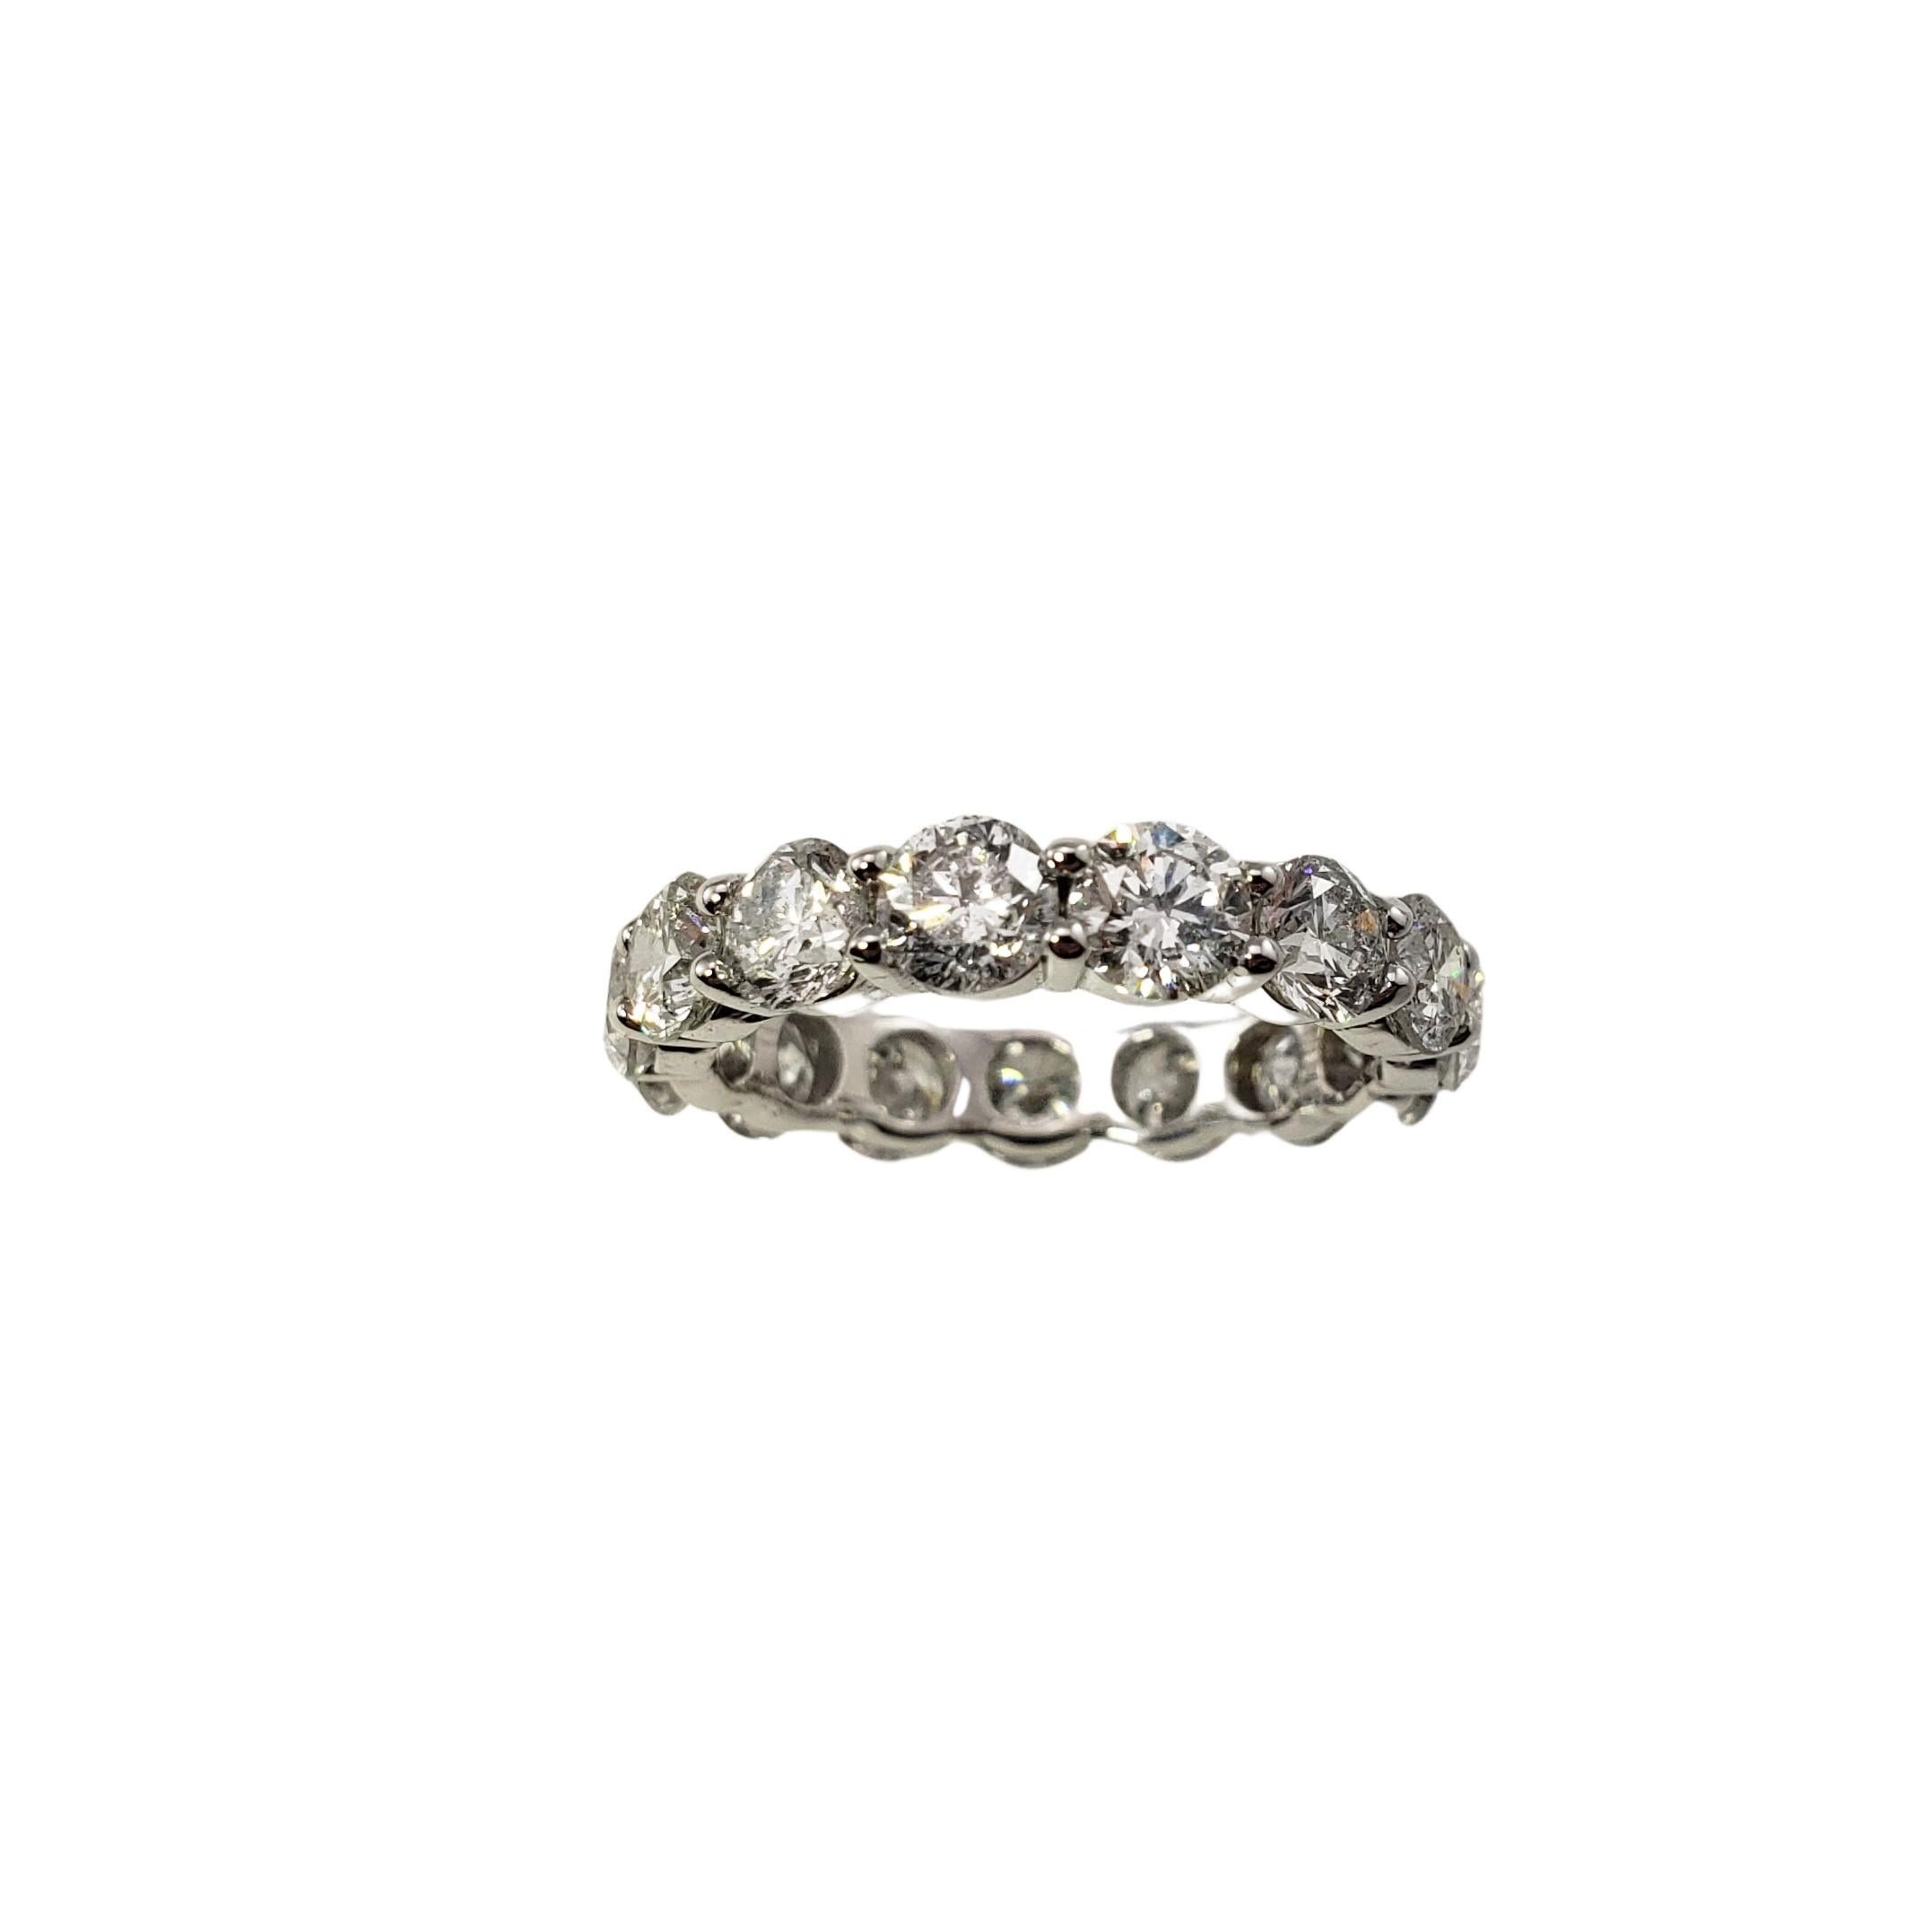 Vintage 18 Karat White Gold Diamond Eternity Band Ring Size 6-

This sparkling eternity band features 15 round brilliant cut diamonds set in classic 18K white gold.  Width:  4 mm.

Approximate total diamond weight:   3.25 ct.

Diamond color: